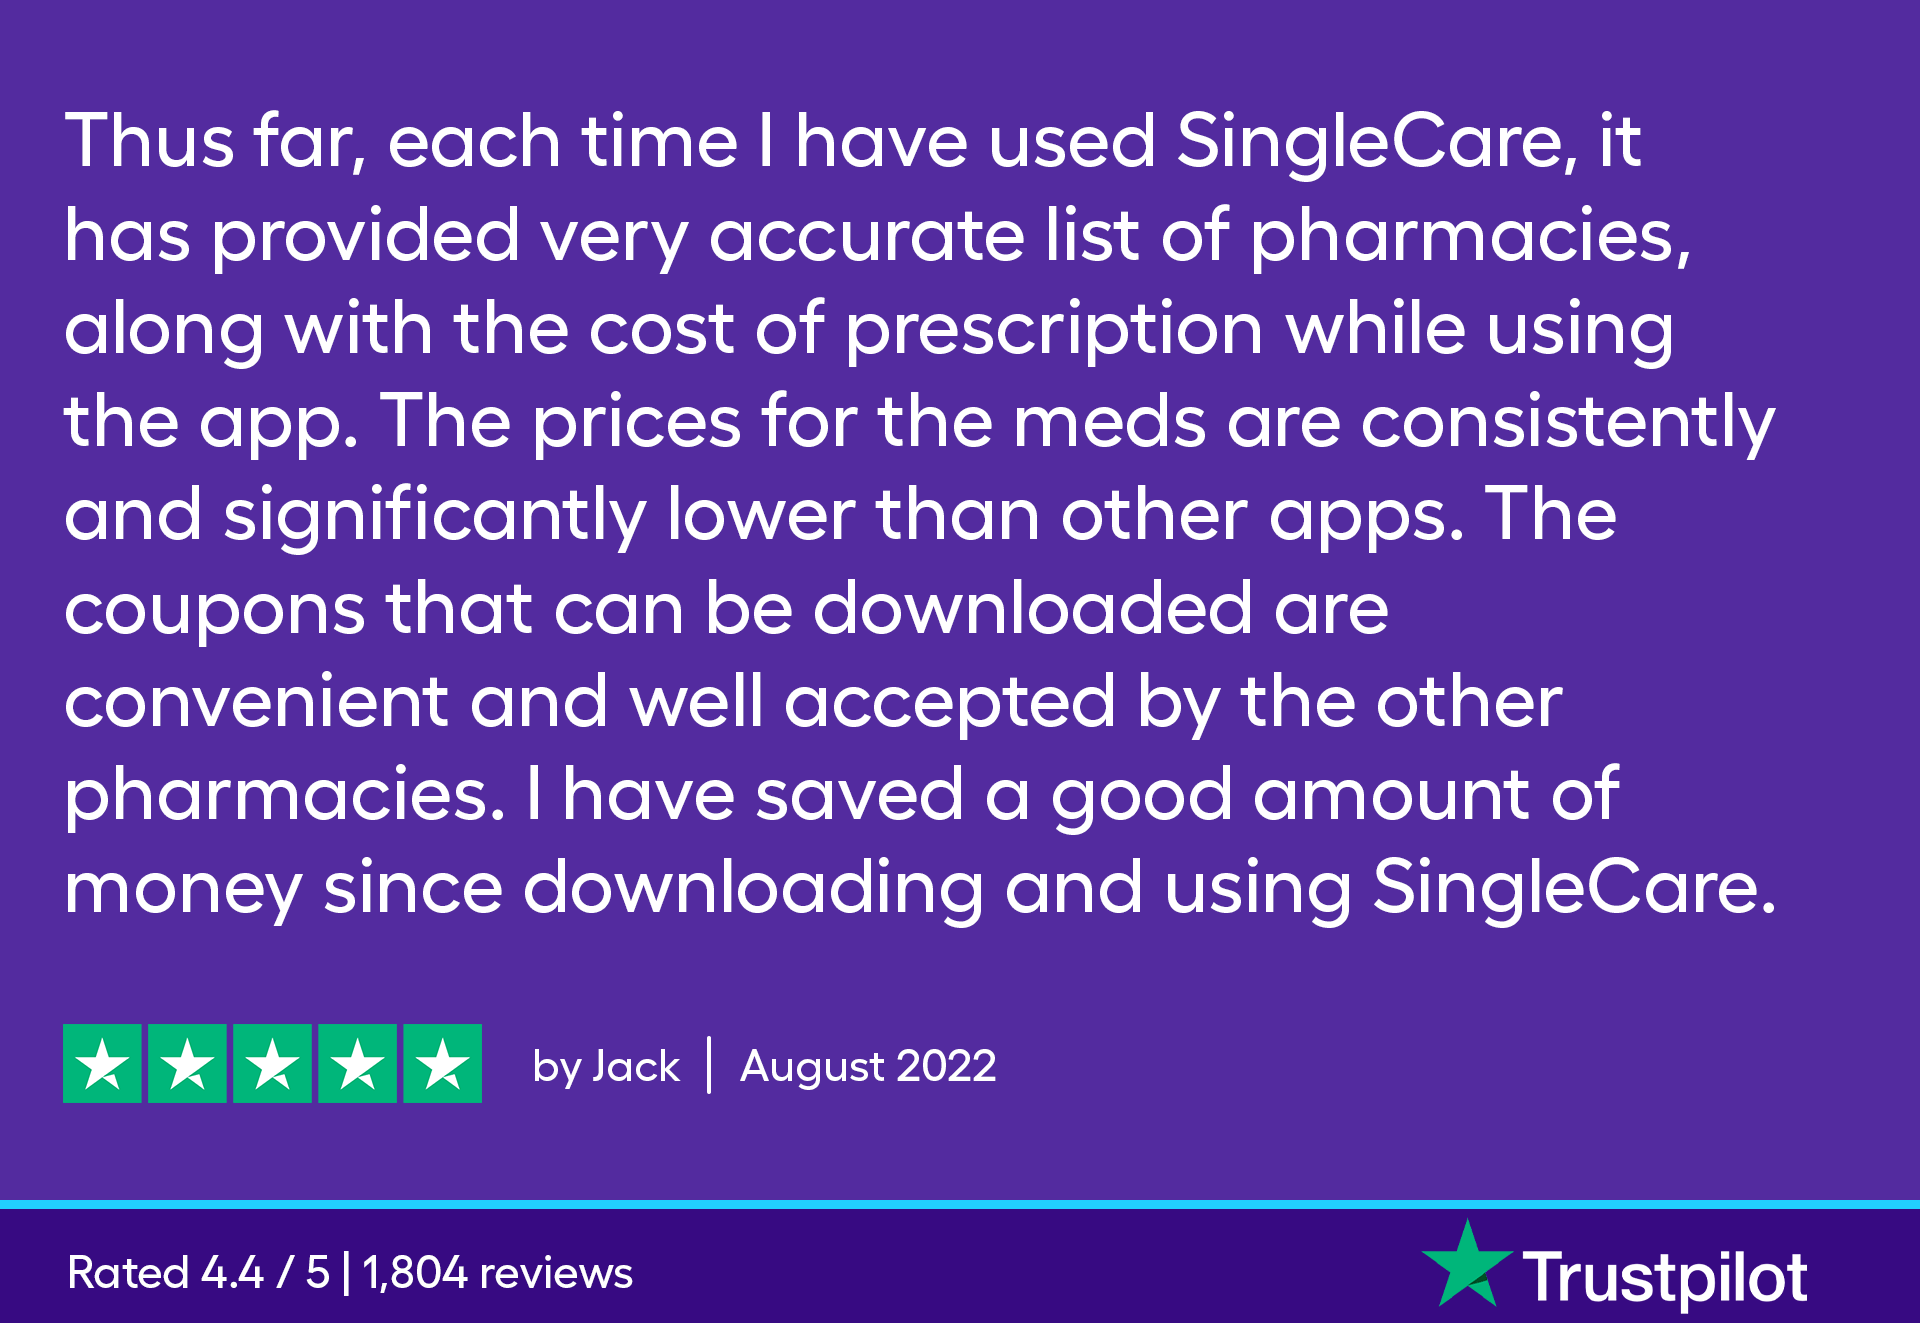 Thus far, each time I have used SingleCare, it has provided very accurate list of pharmacies, along with the cost of prescription while using the app. The prices for the meds are consistently and significantly lower than other apps. The coupons that can be downloaded are convenient and well accepted by the pharmacies. I have saved a good amount of money since downloading and using SingleCare.